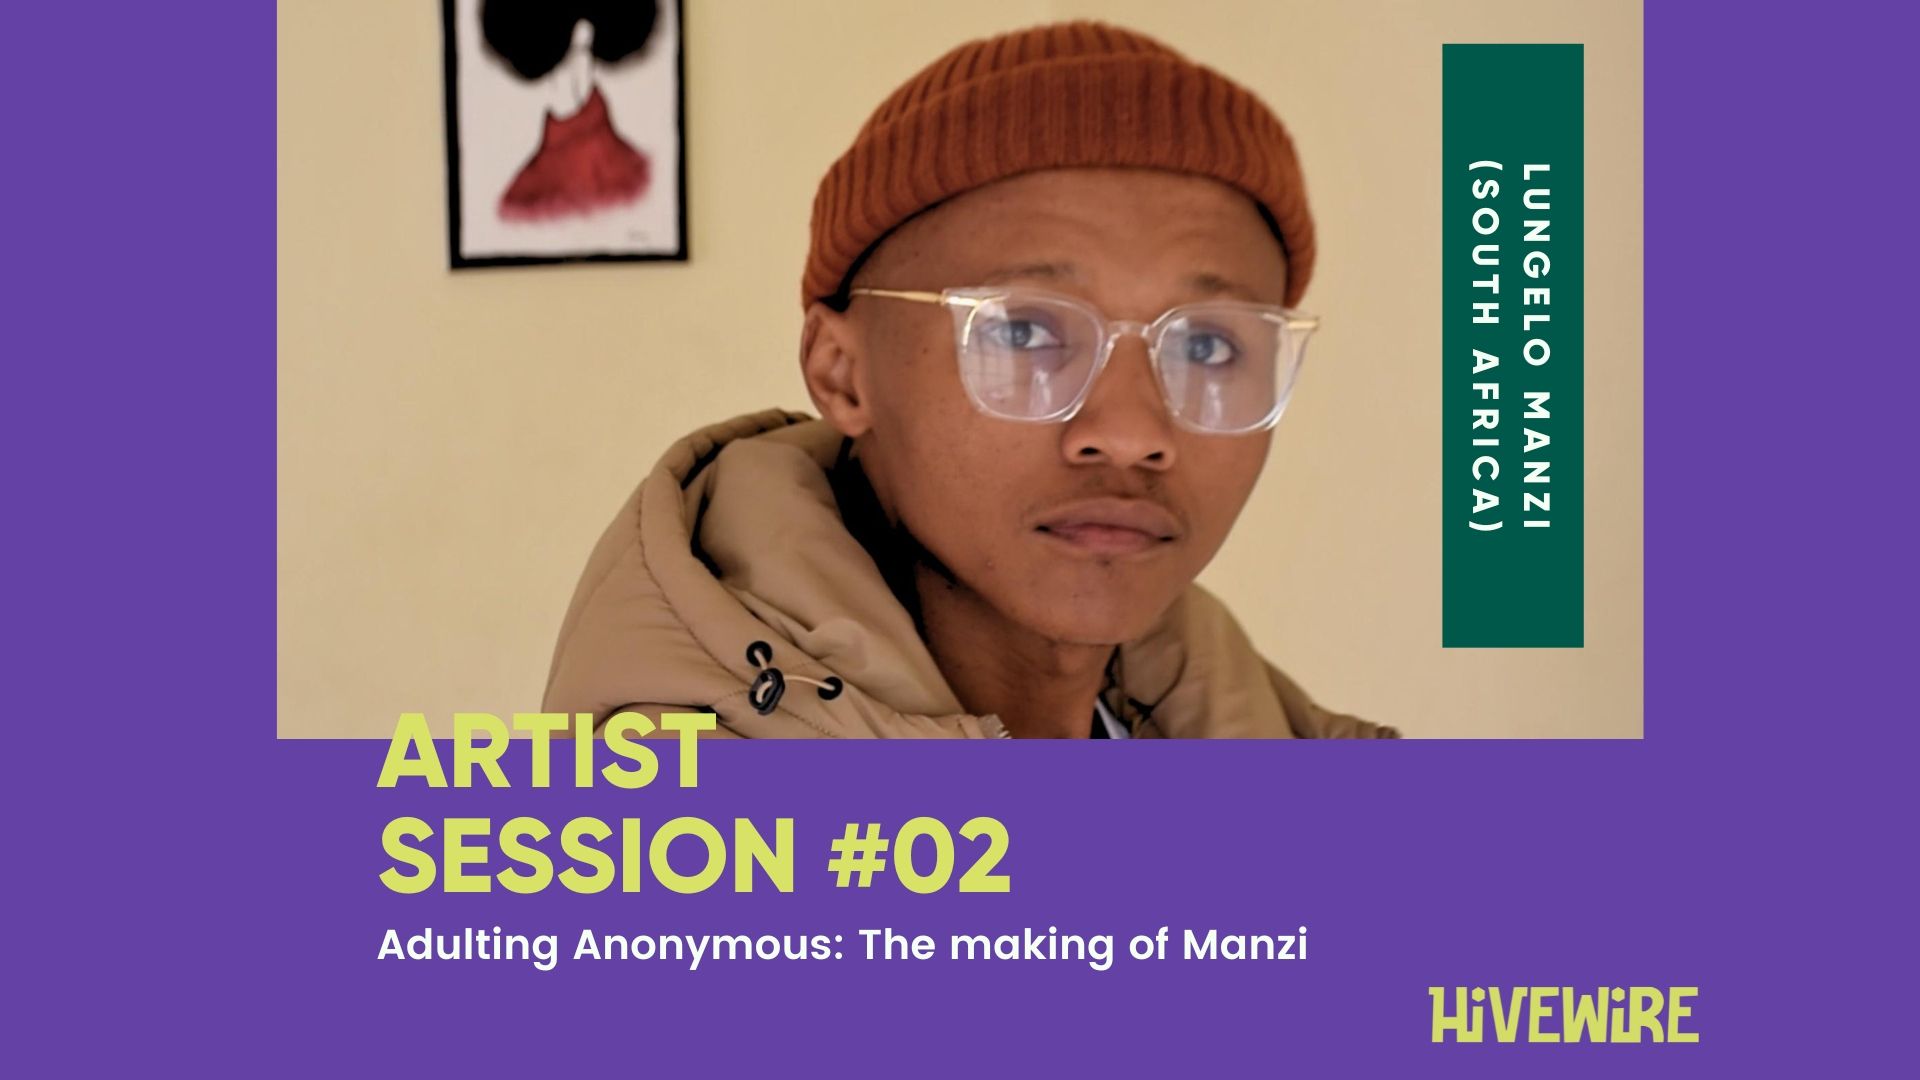 Artist Session #02 - Lungelo Manzi (South Africa): Adulting Anonymous (or The Makings Of Manzi)